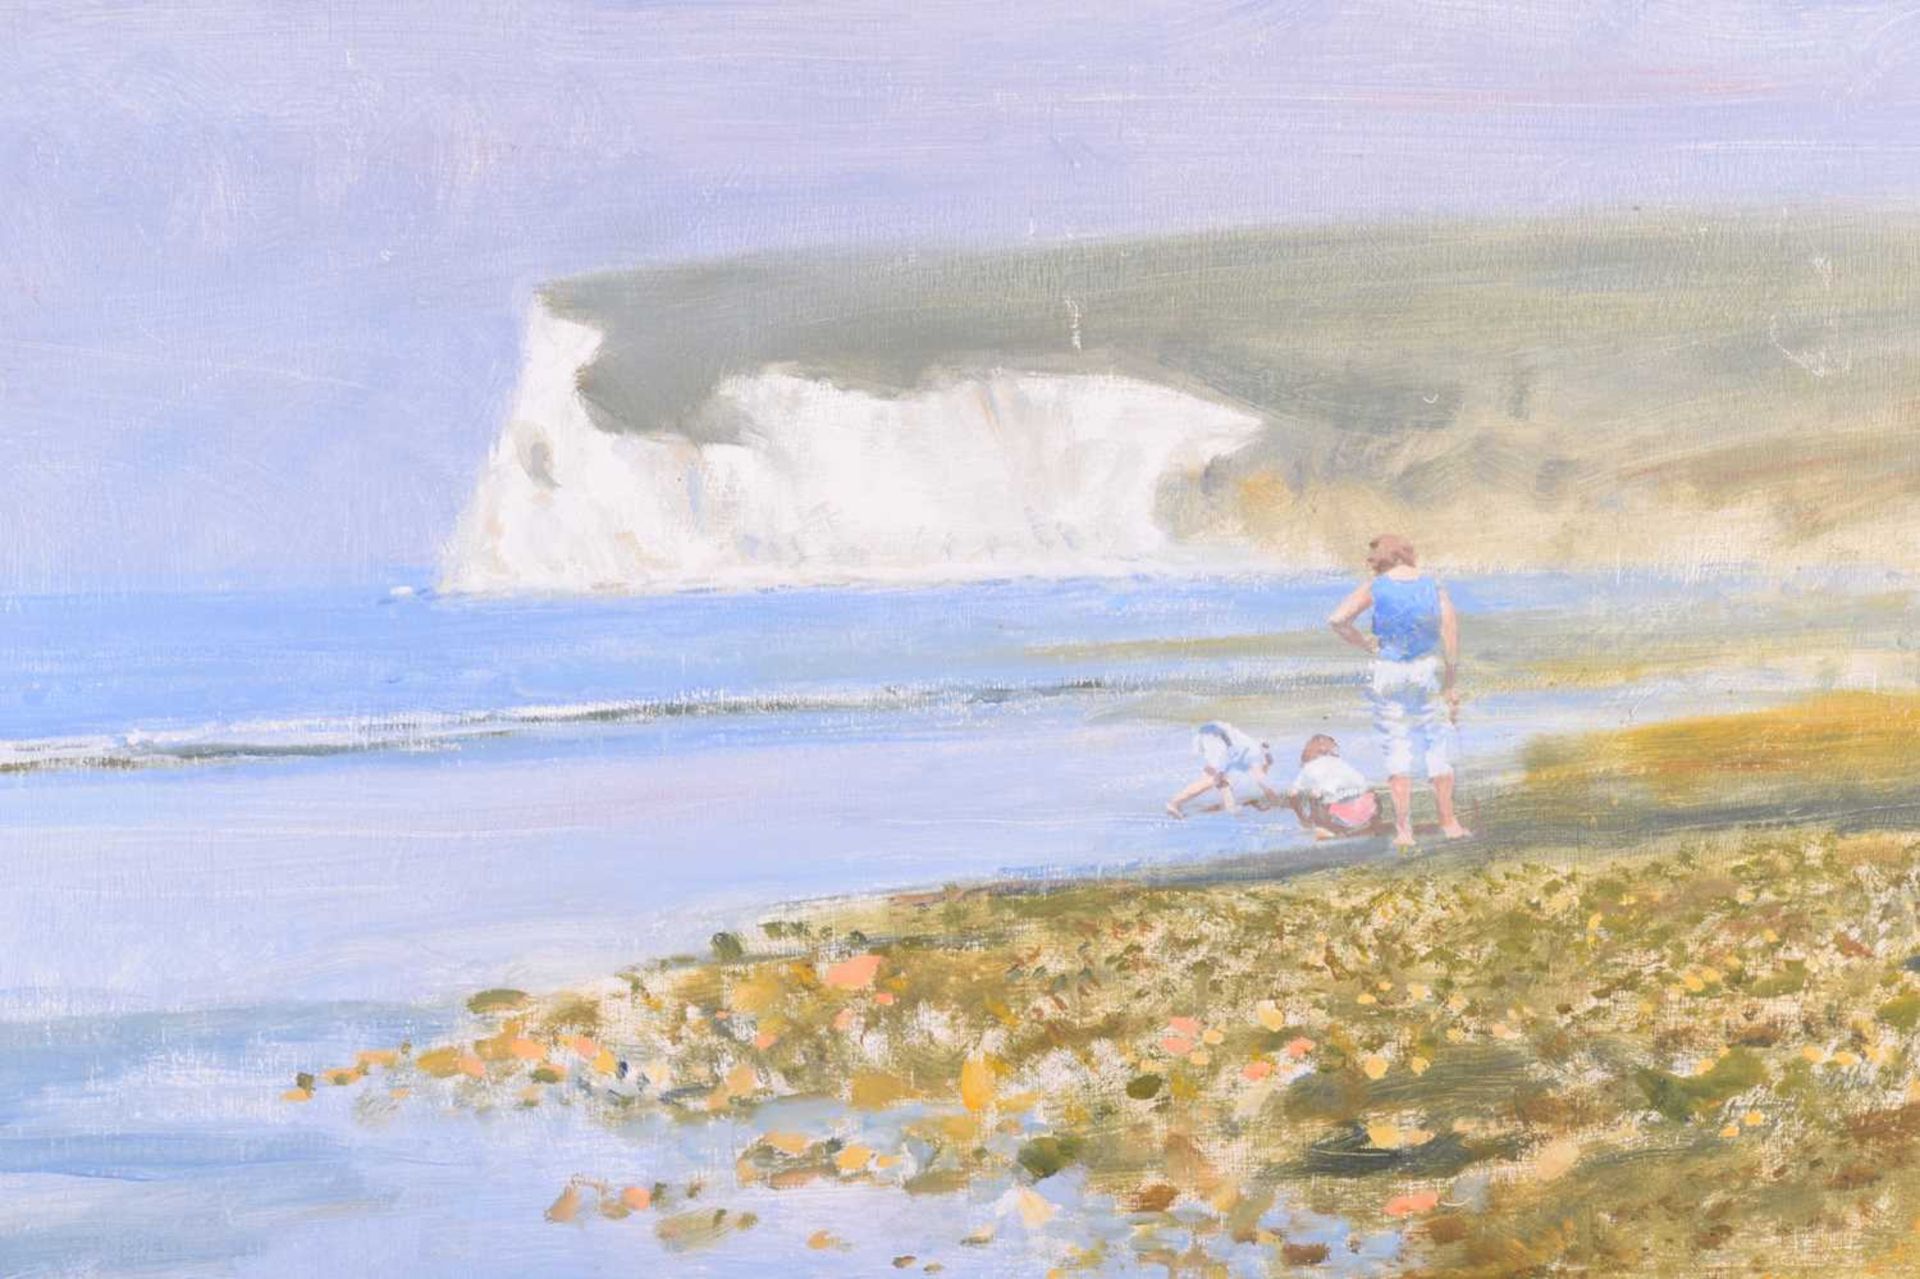 Norman R. Hepple (1908 - 1994), 'Beachtime Fun', signed and dated 1993, oil on board, 50 x 60 cm, fr - Image 6 of 7